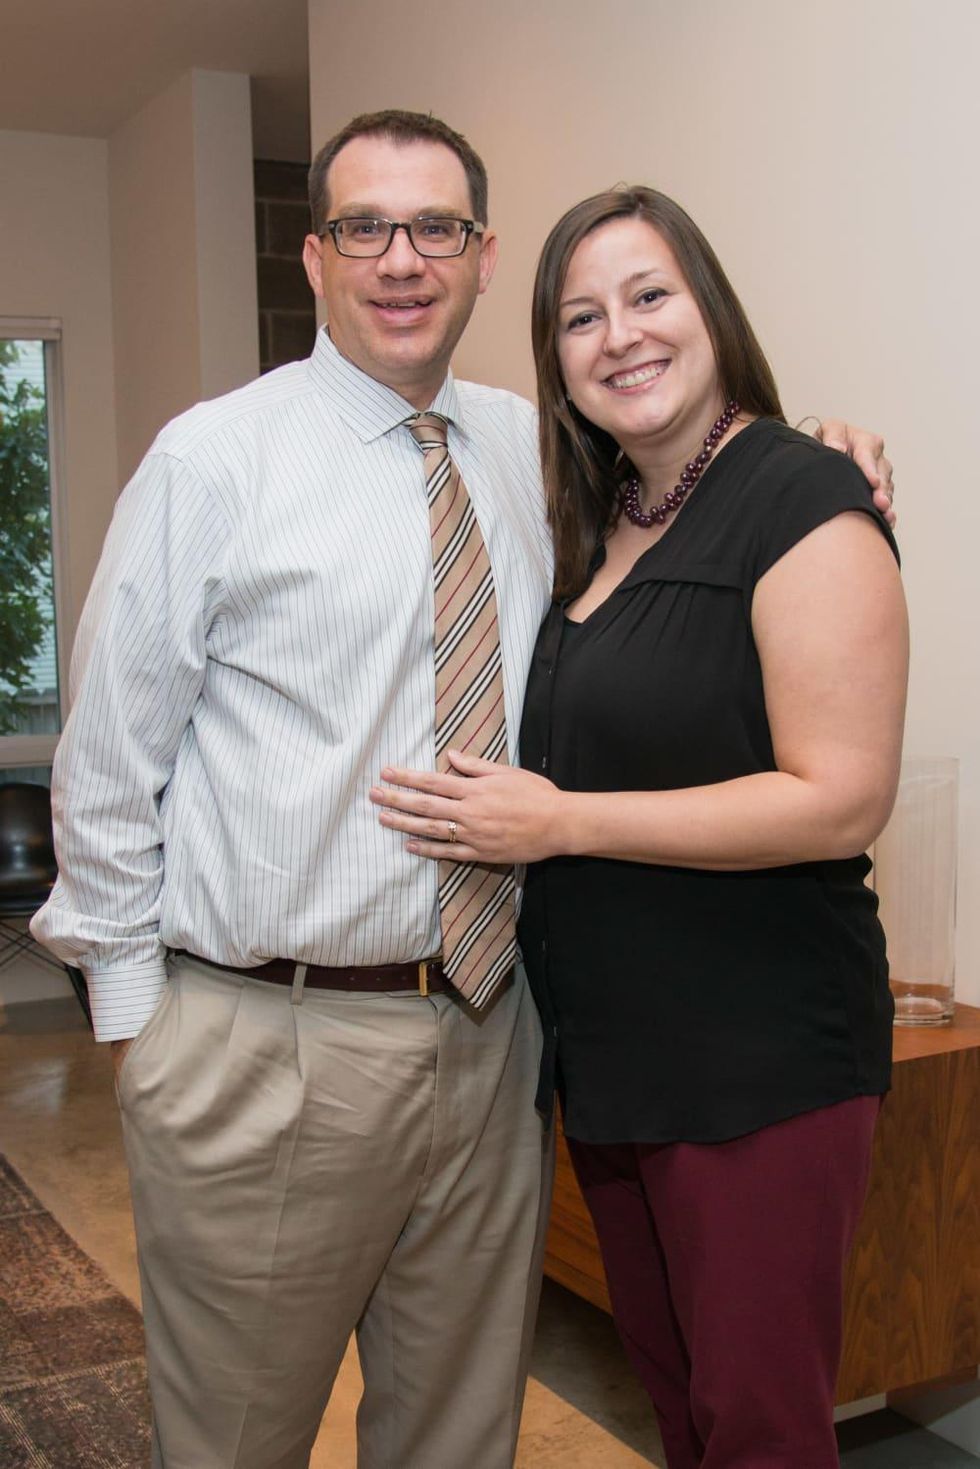 Houston, HGO Young Patrons event, October 2015, Bryan Bagley, Jessica Bagley